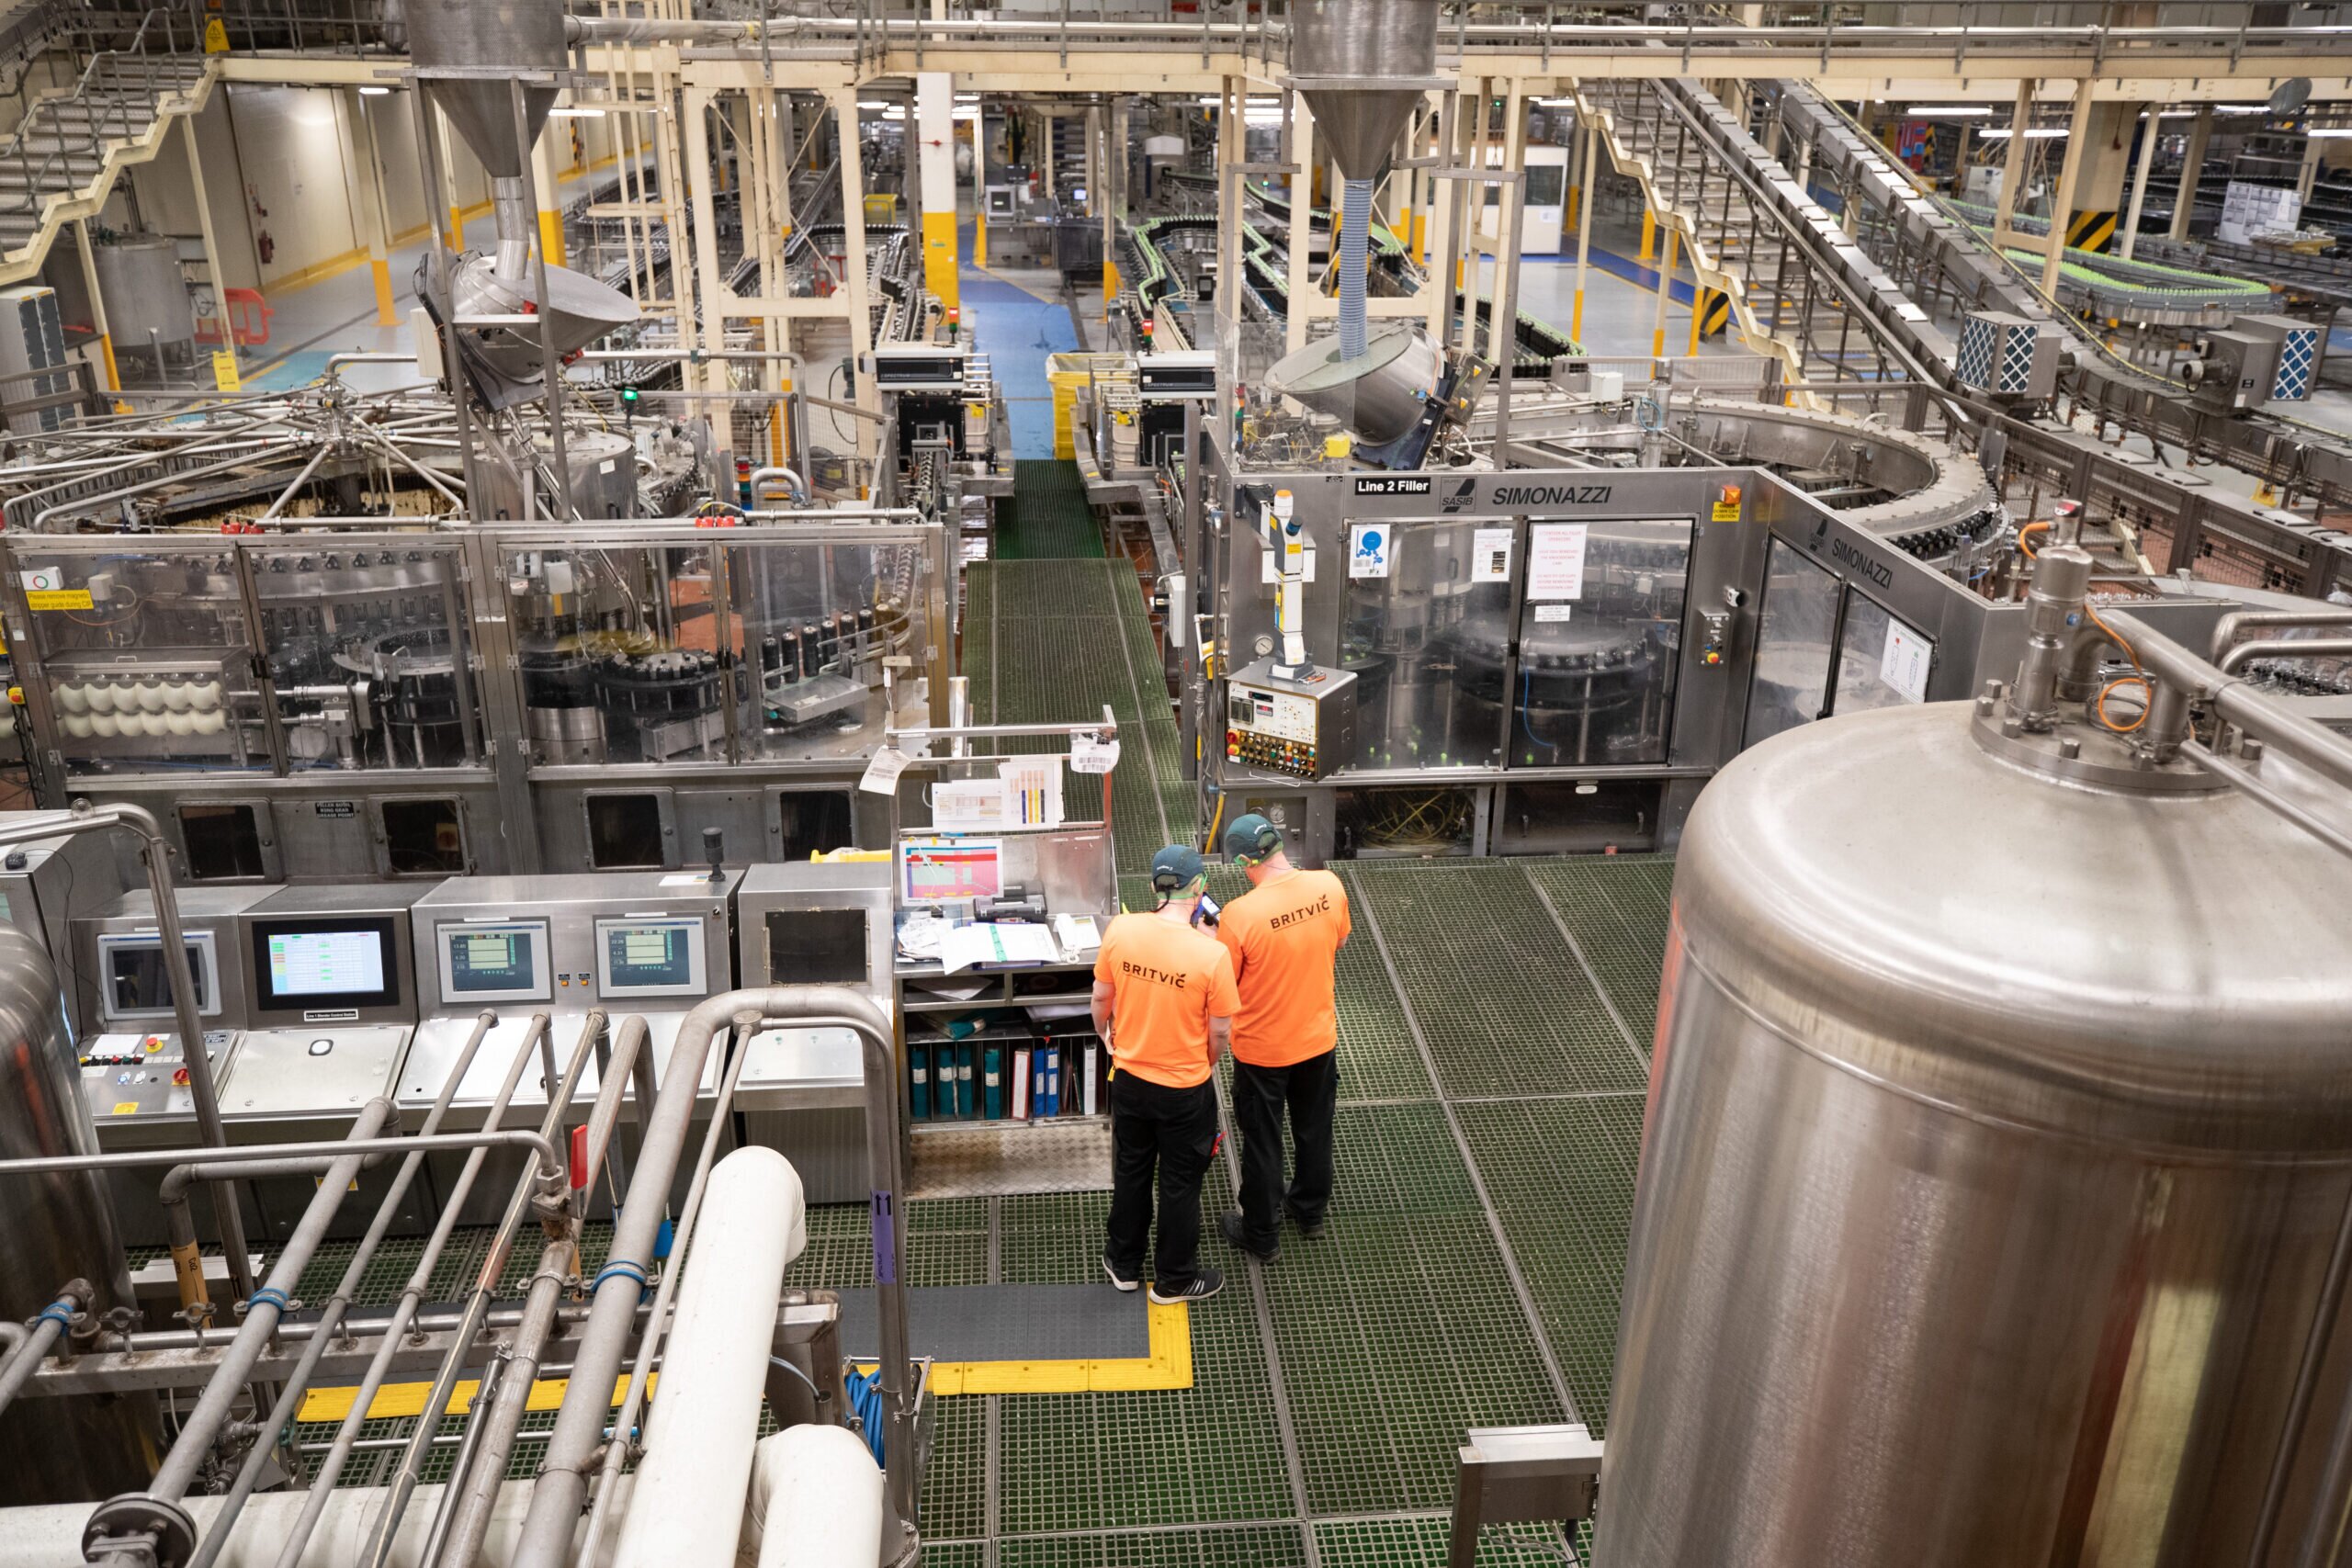 Britvic’s £22.5m investment to increase production by 30%